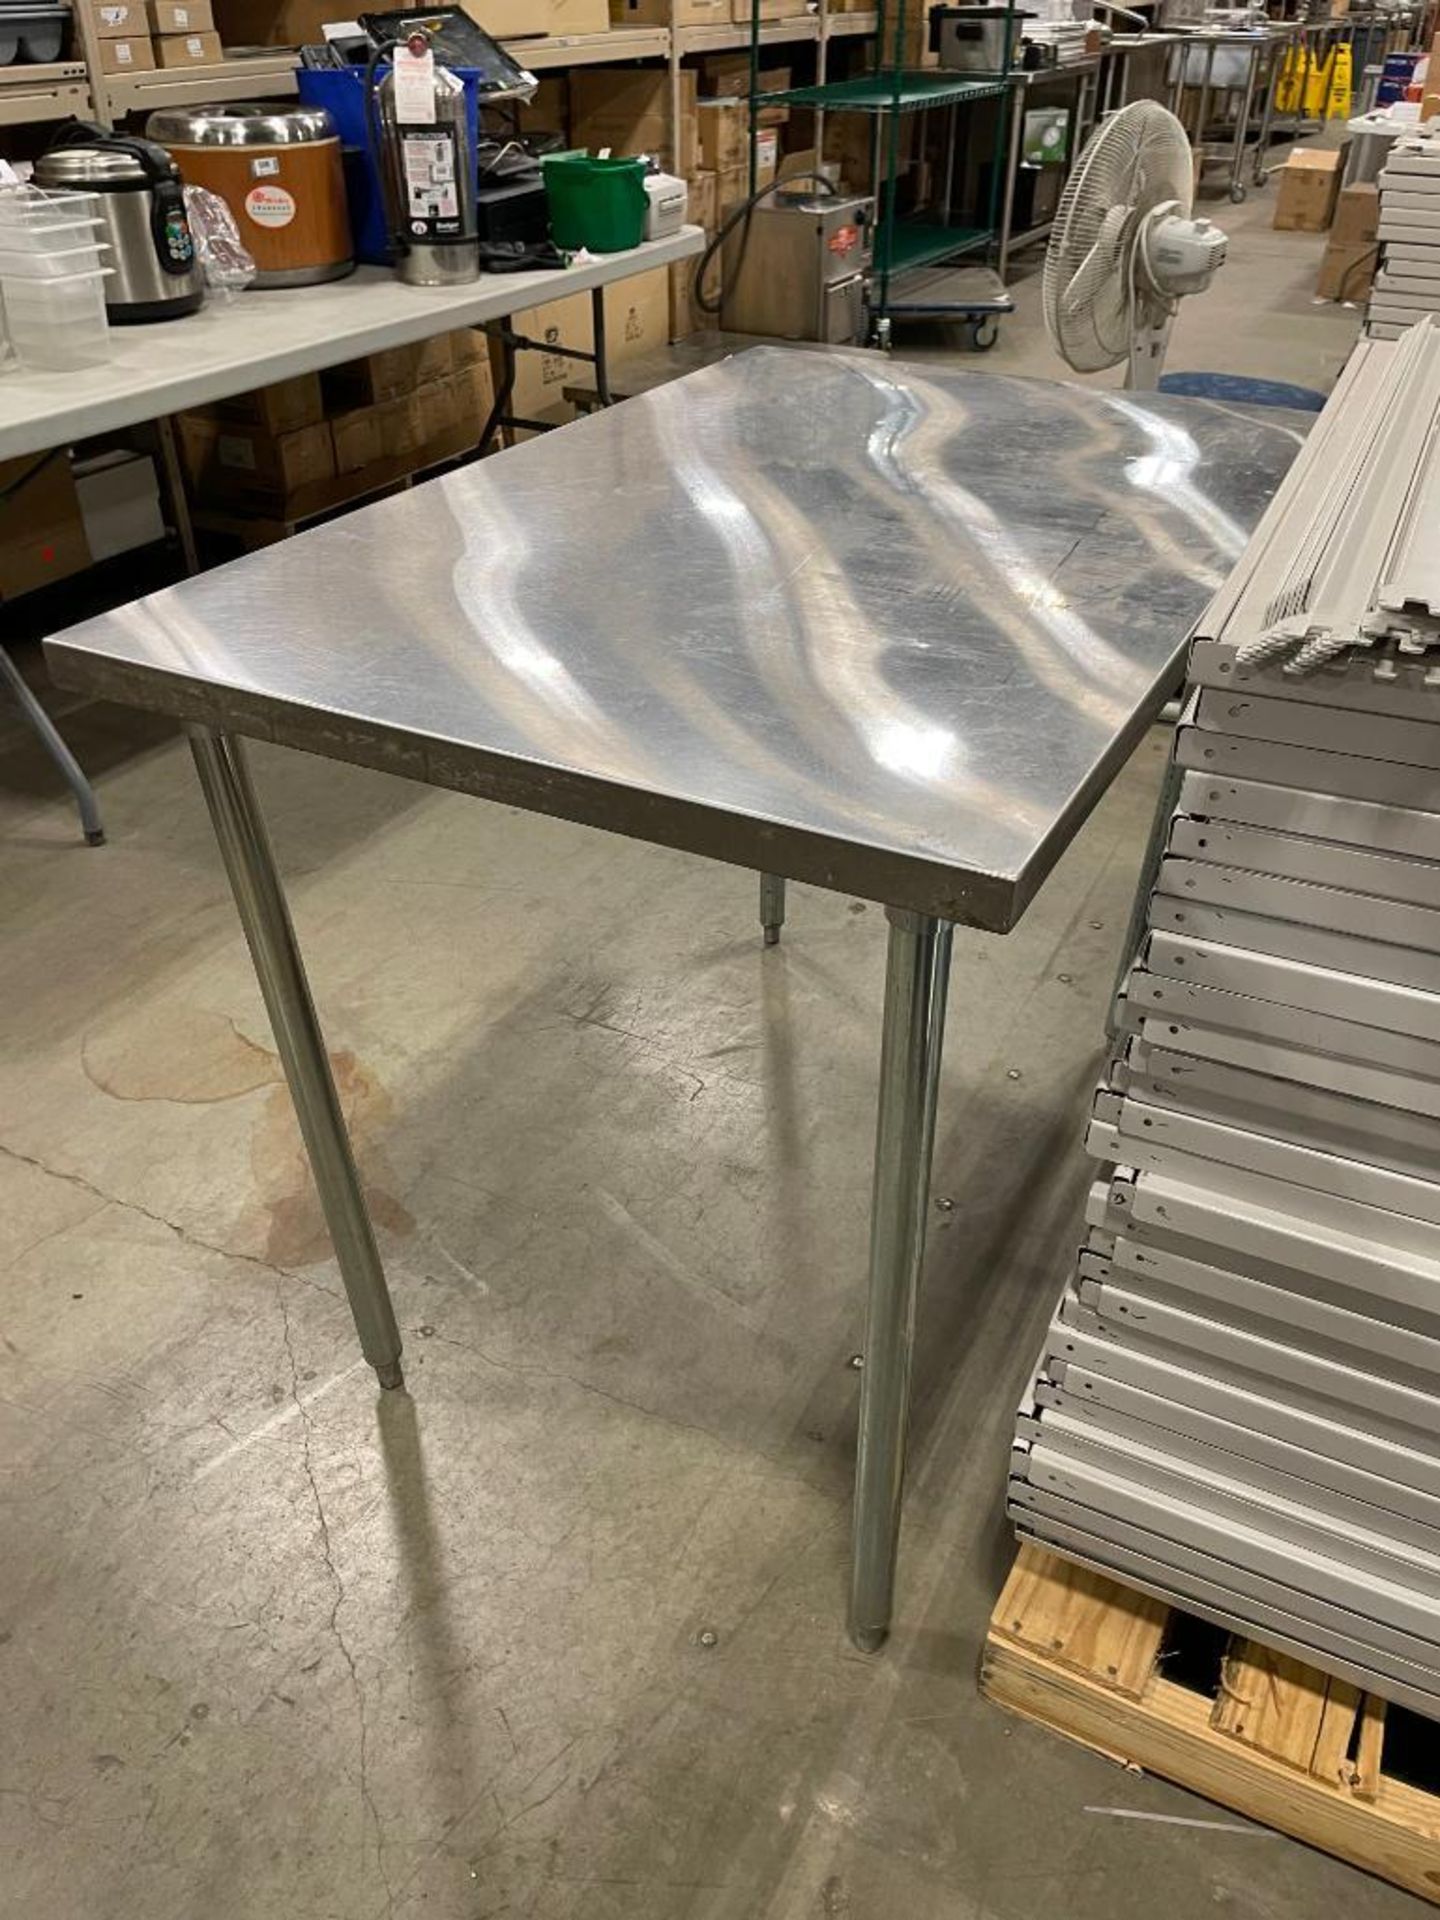 48" X 30" STAINLESS STEEL WORK TABLE - Image 4 of 6